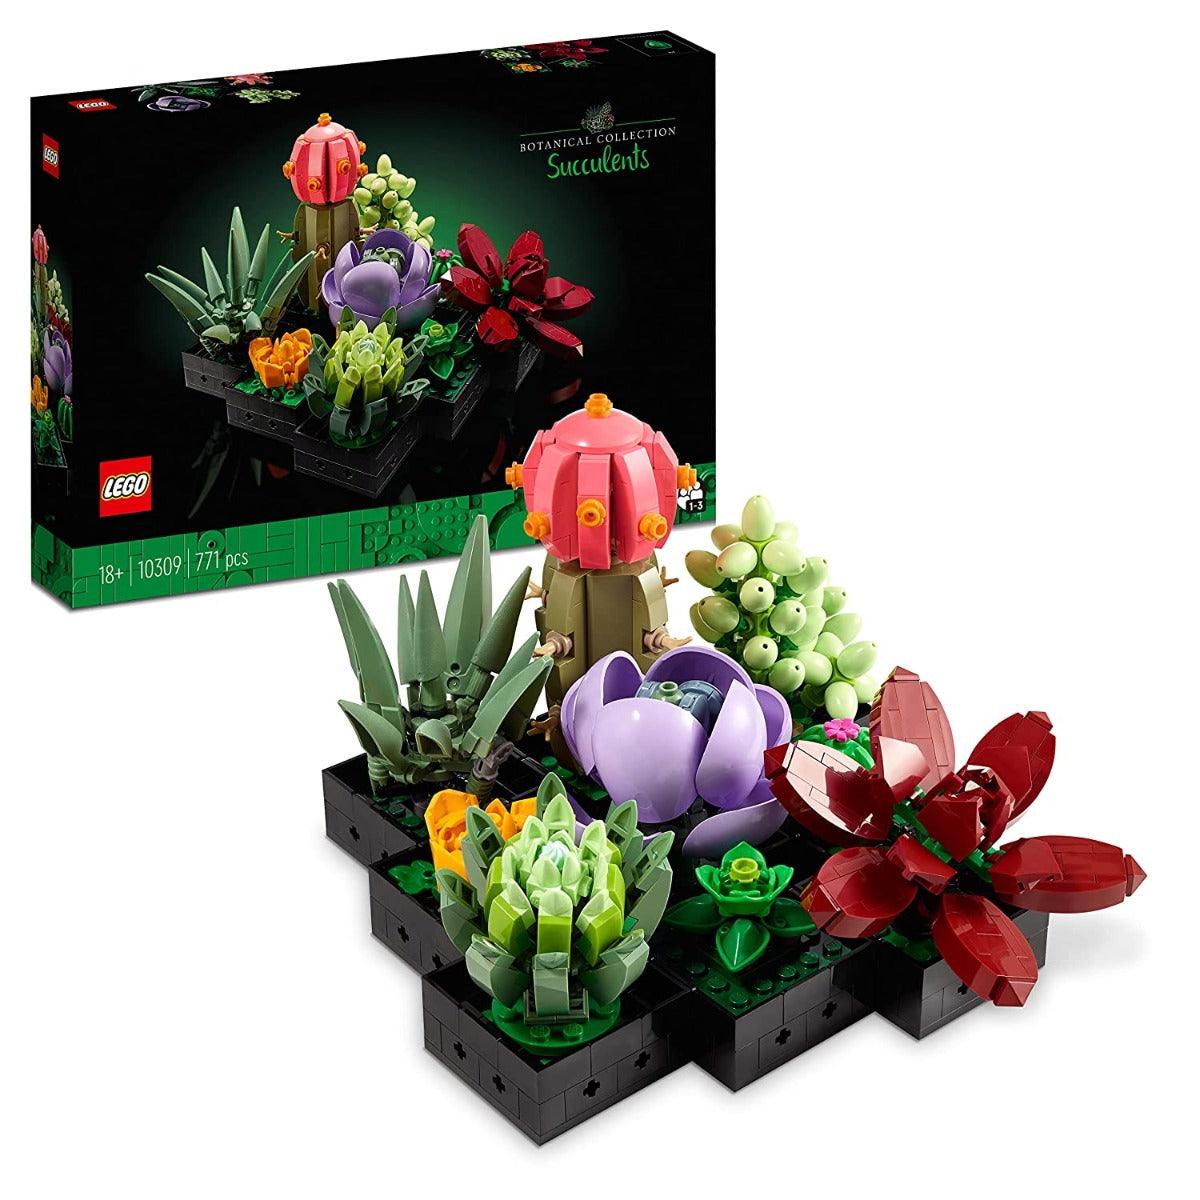 LEGO Botanical Collection Succulents Building Kit for Ages 16+